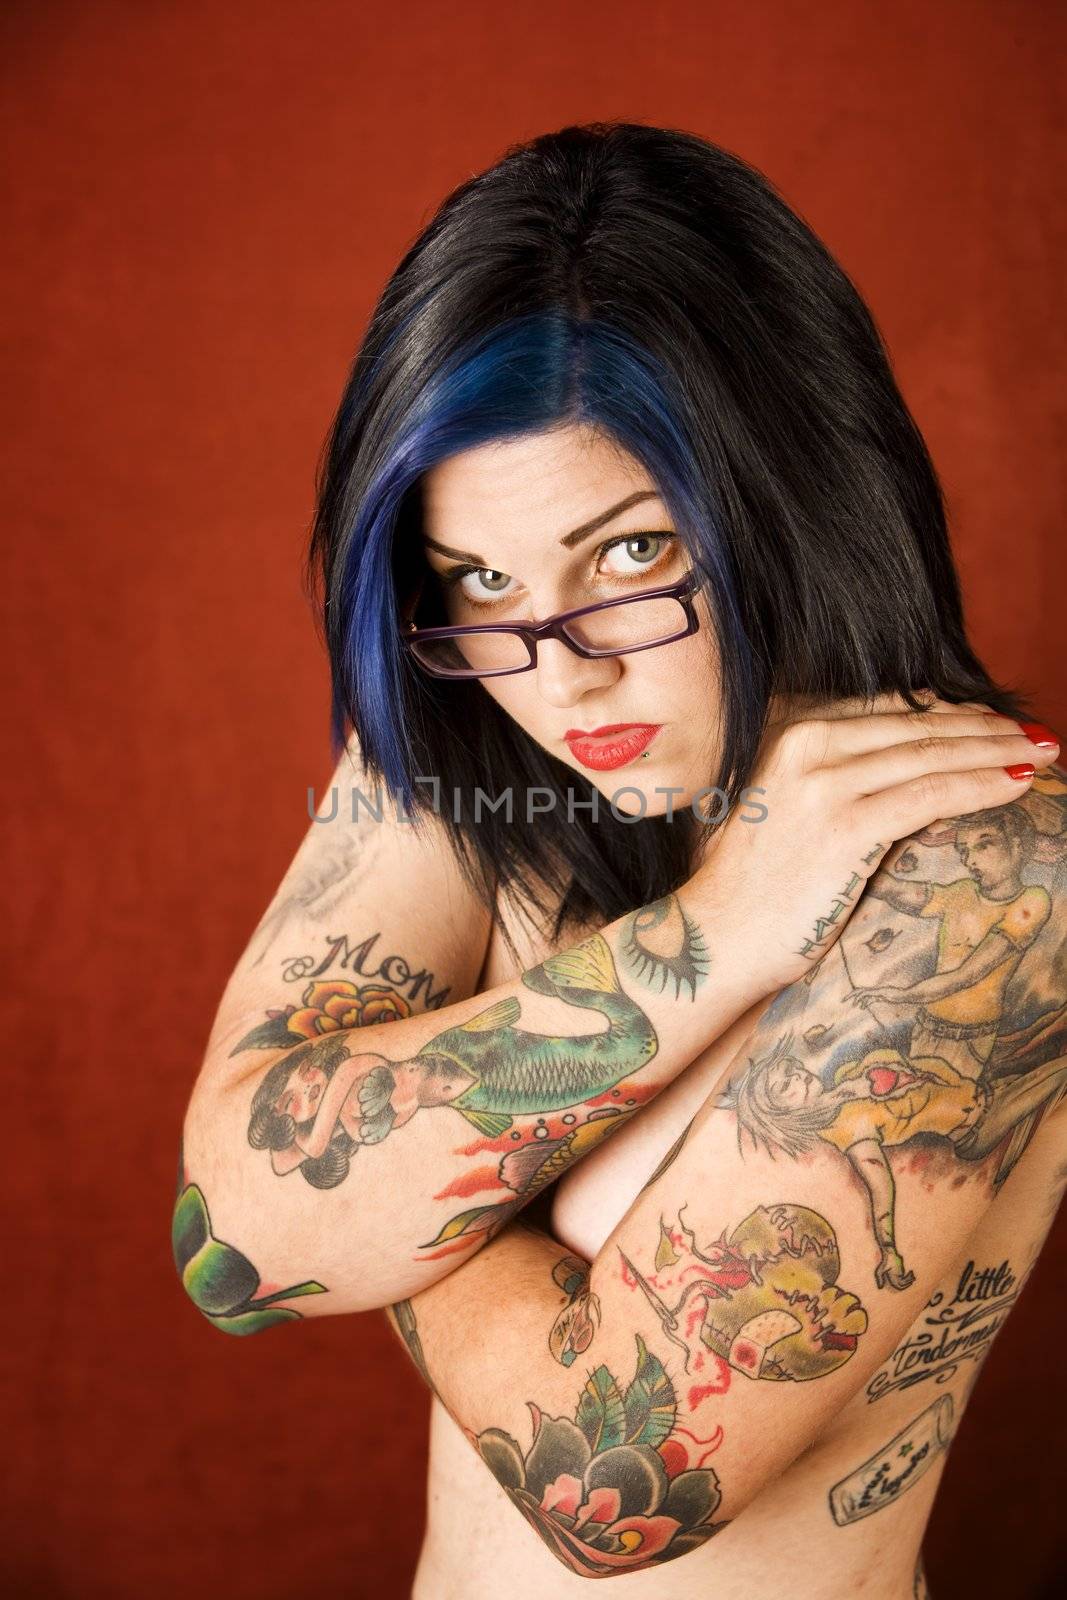 Woman with tattoos and crossed arms by Creatista